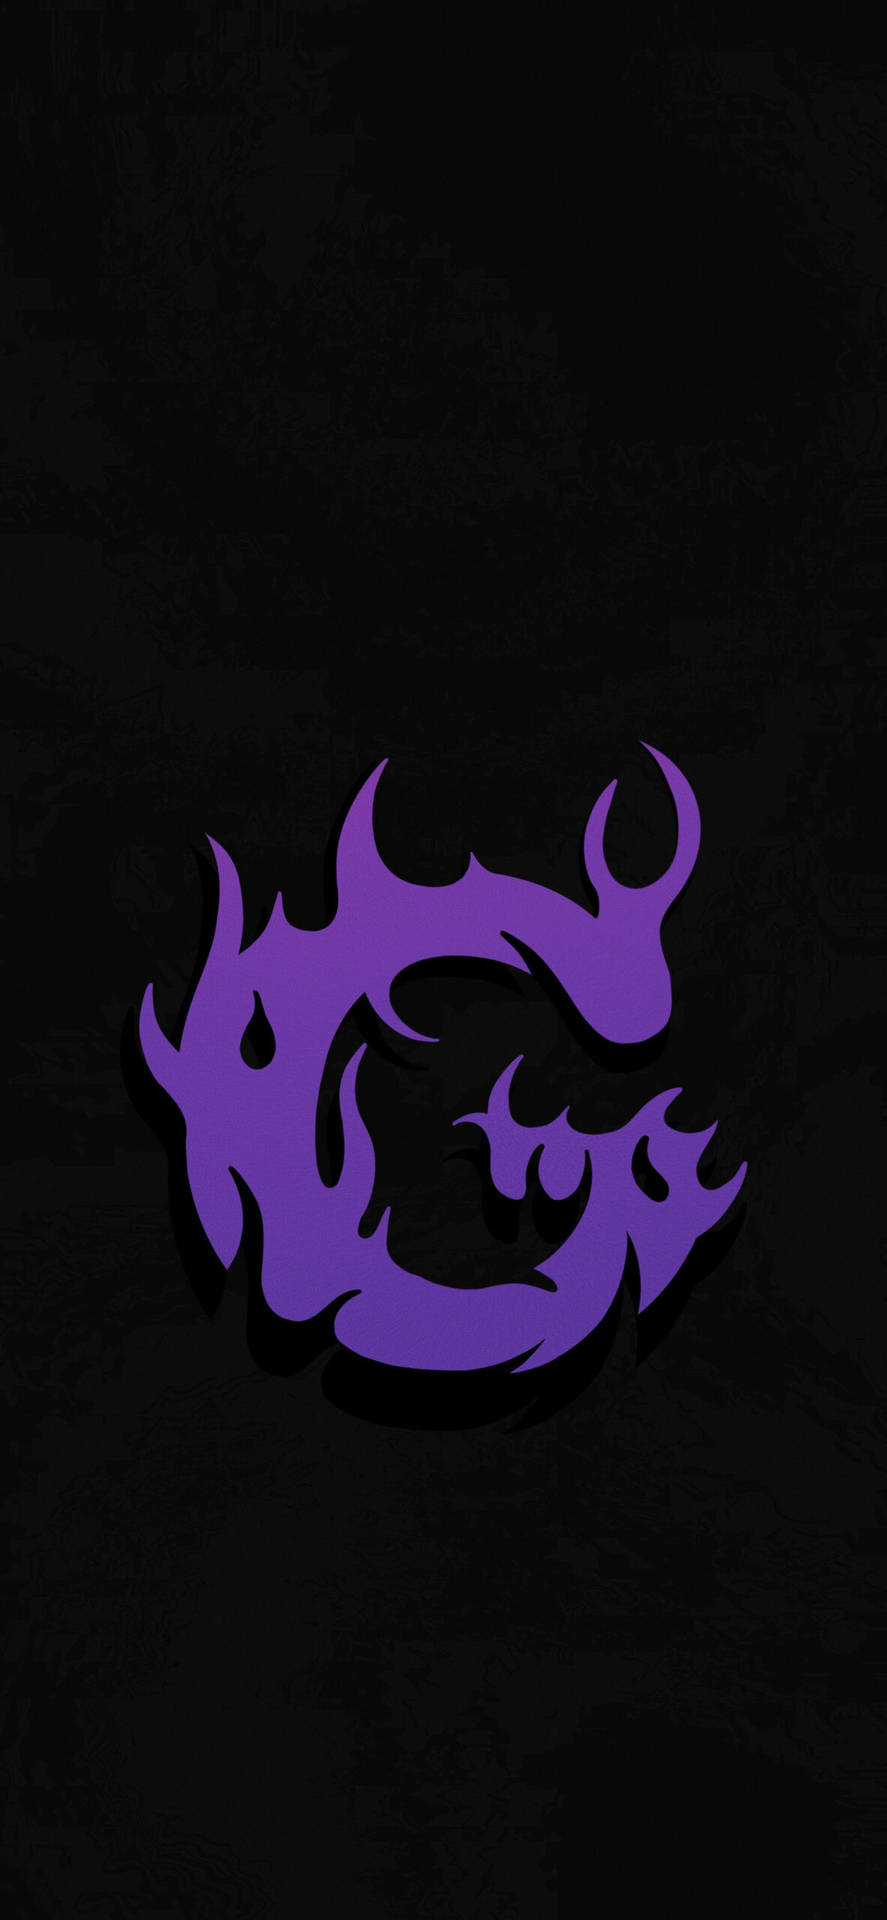 Letter G In Purple Flames Background